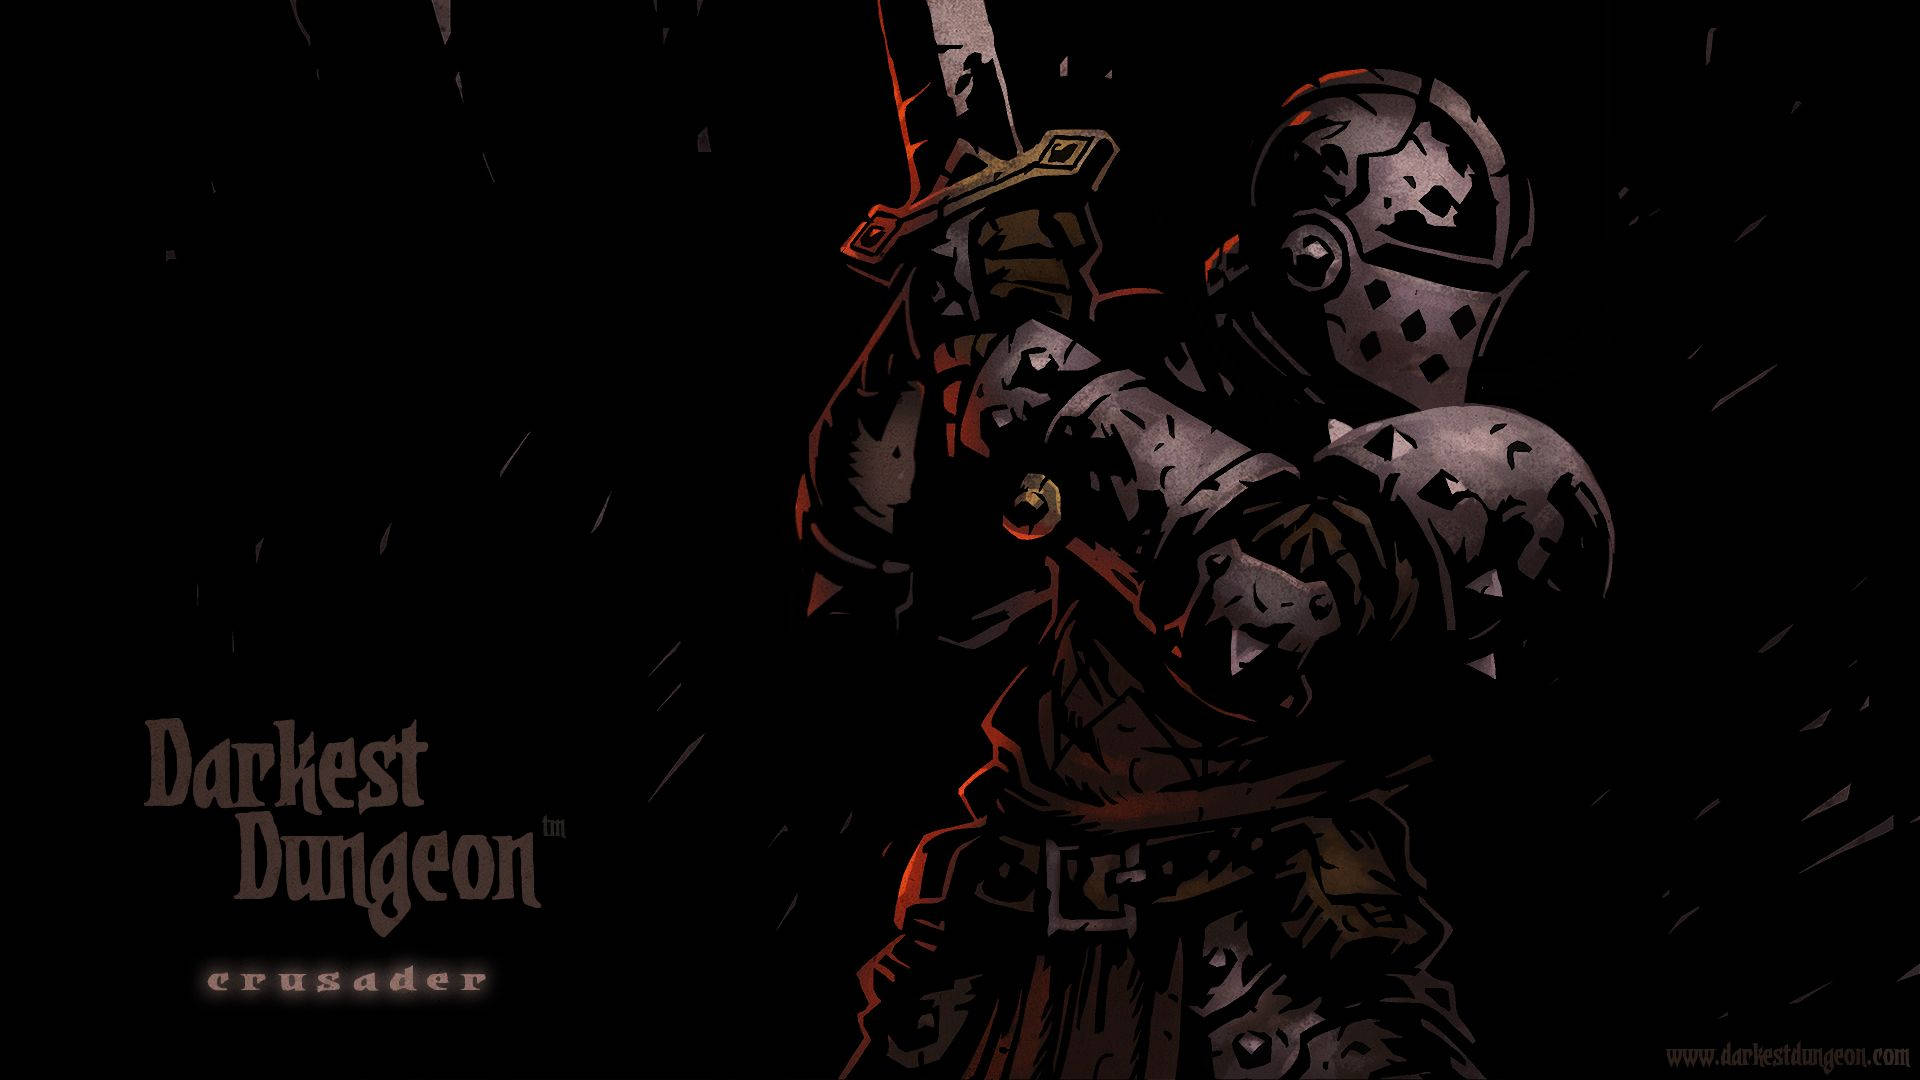 “Fortitude and valor in the face of insurmountable odds - the Crusader in the Darkest Dungeon” Wallpaper